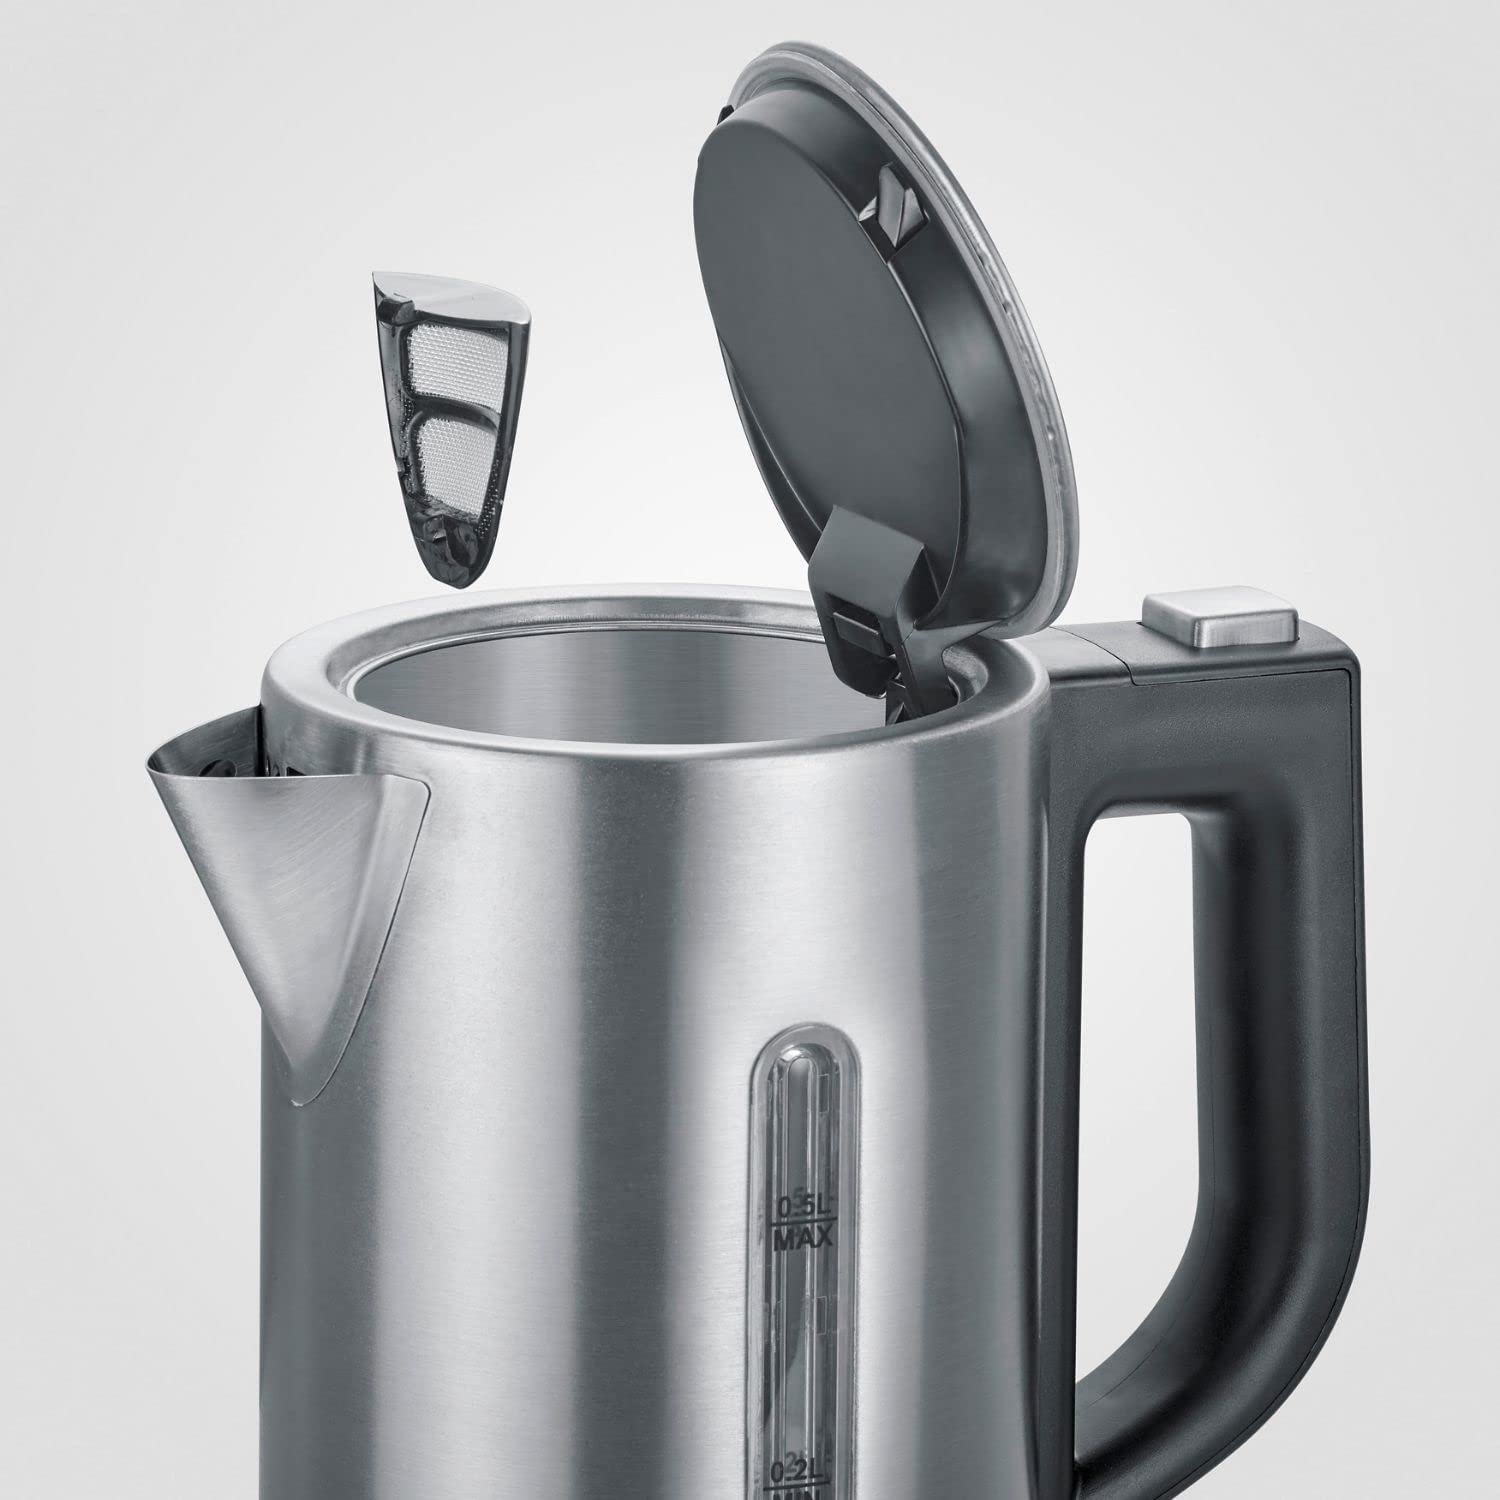 SEVERIN Travel Kettle Set, Mini Travel Kettle for 0.5L Electric Kettle with 2 Plastic Cups & 2 Spoons, Brushed Stainless Steel/Black, WK 3647